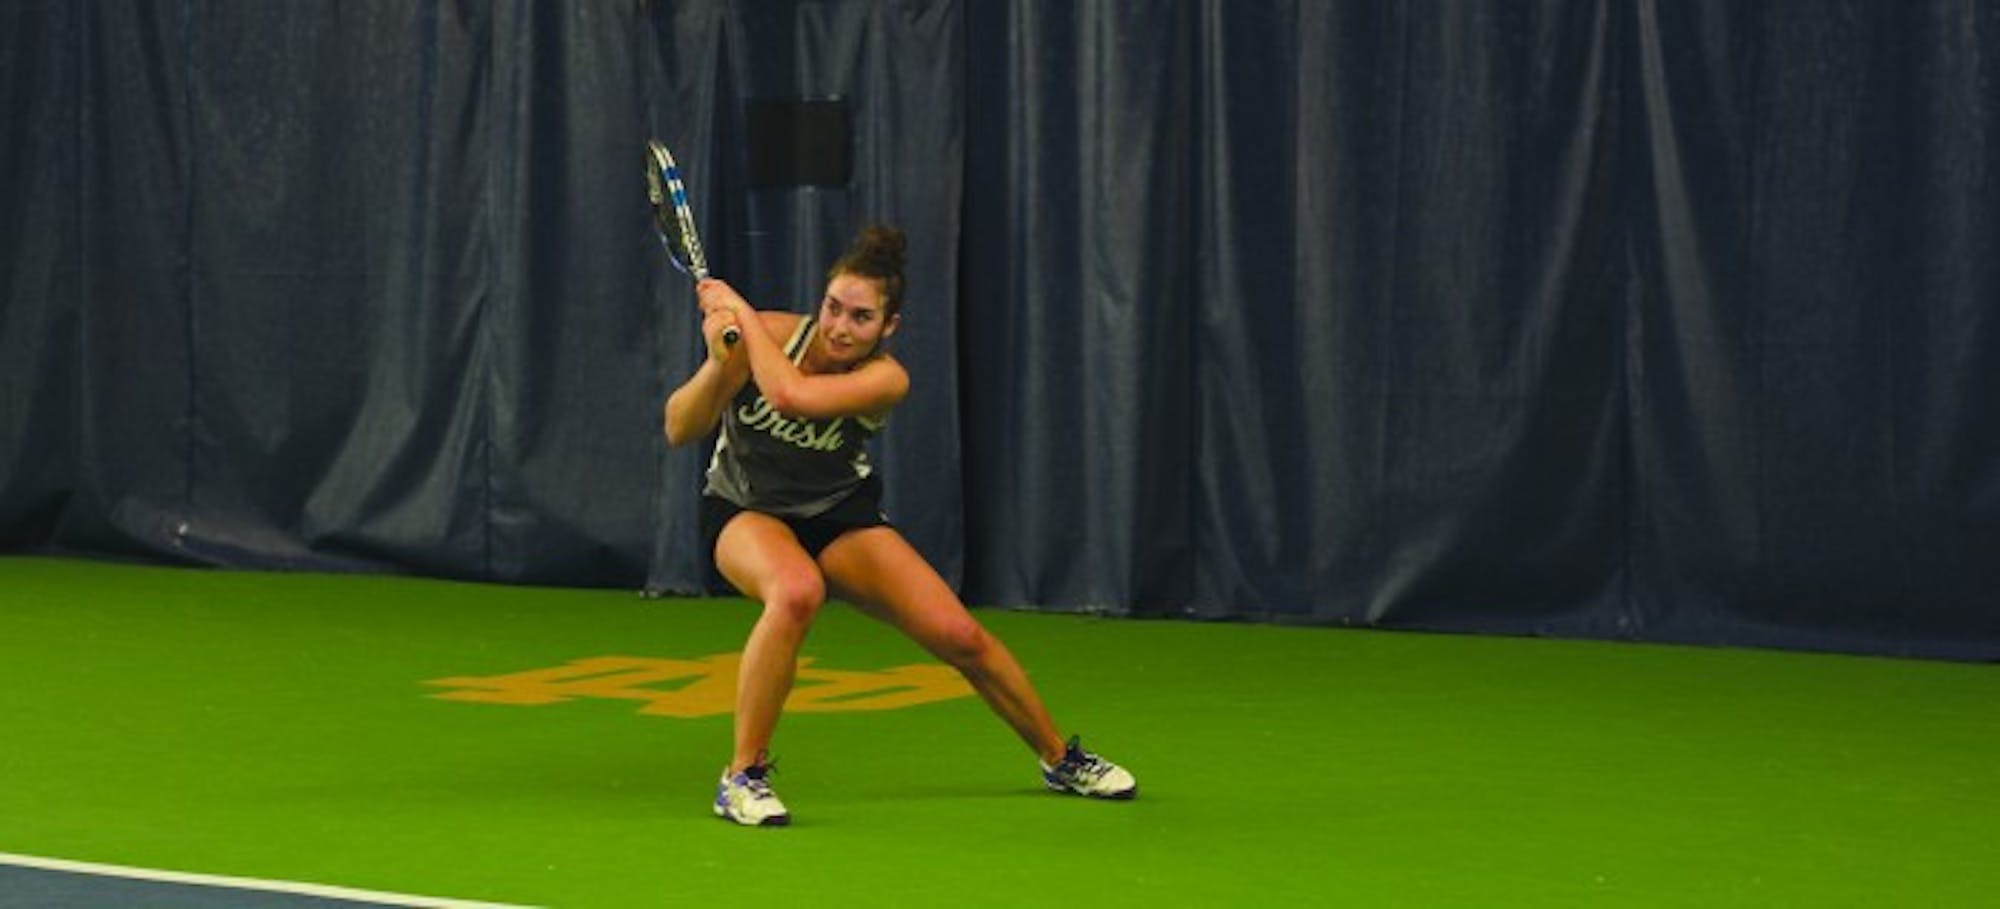 Irish senior Jane Fennelly returns her opponent’s shot during Notre Dame’s 6-1 win over Indiana on Feb. 20 at Eck Tennis Pavilion.